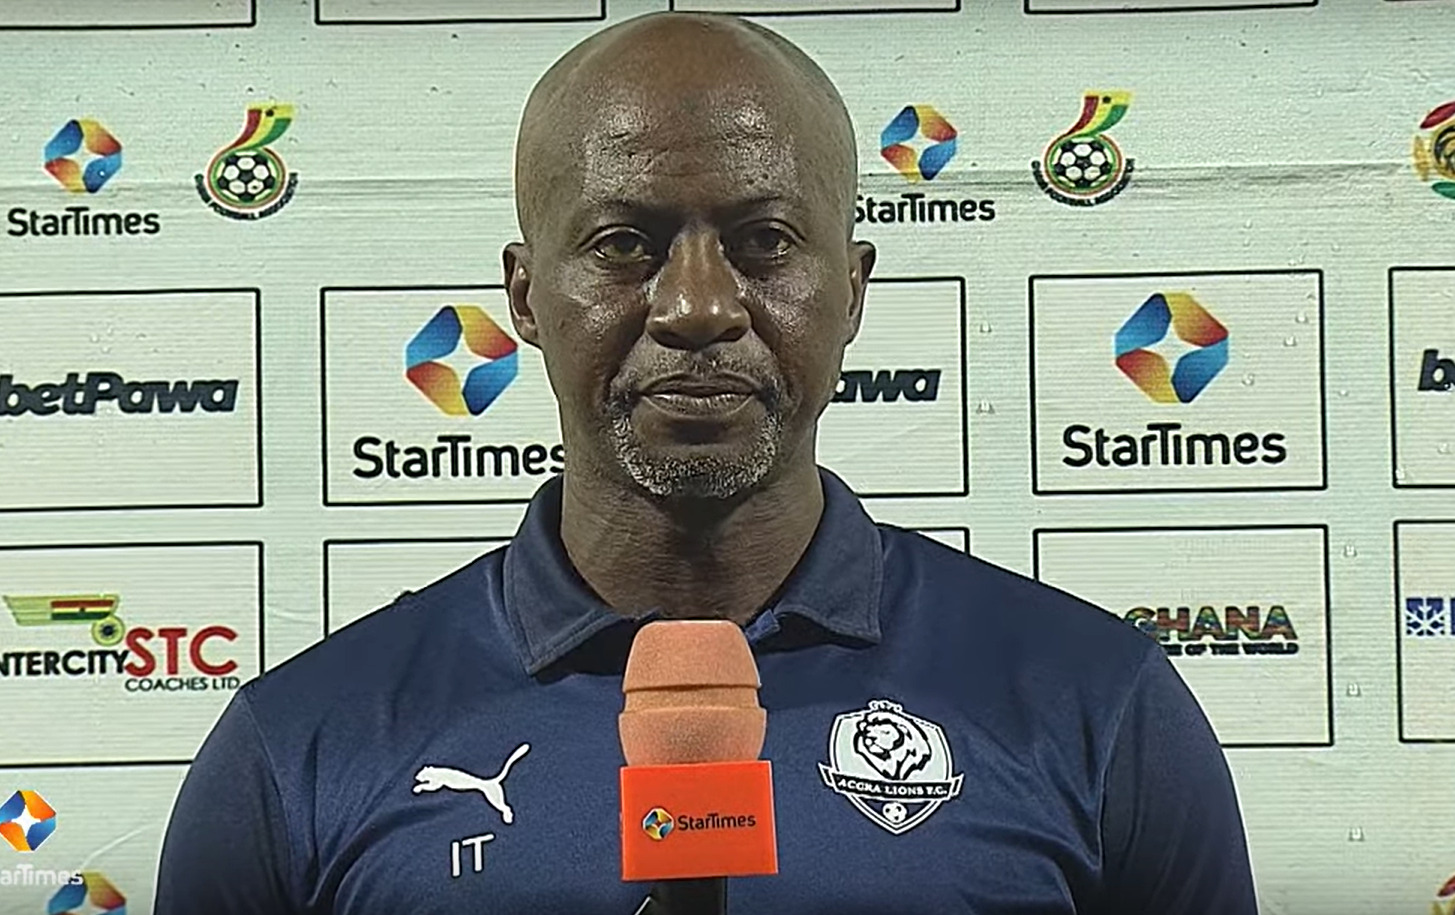 Accra Lions coach Ibrahim Tanko worried about poor defense after Olympics humbling